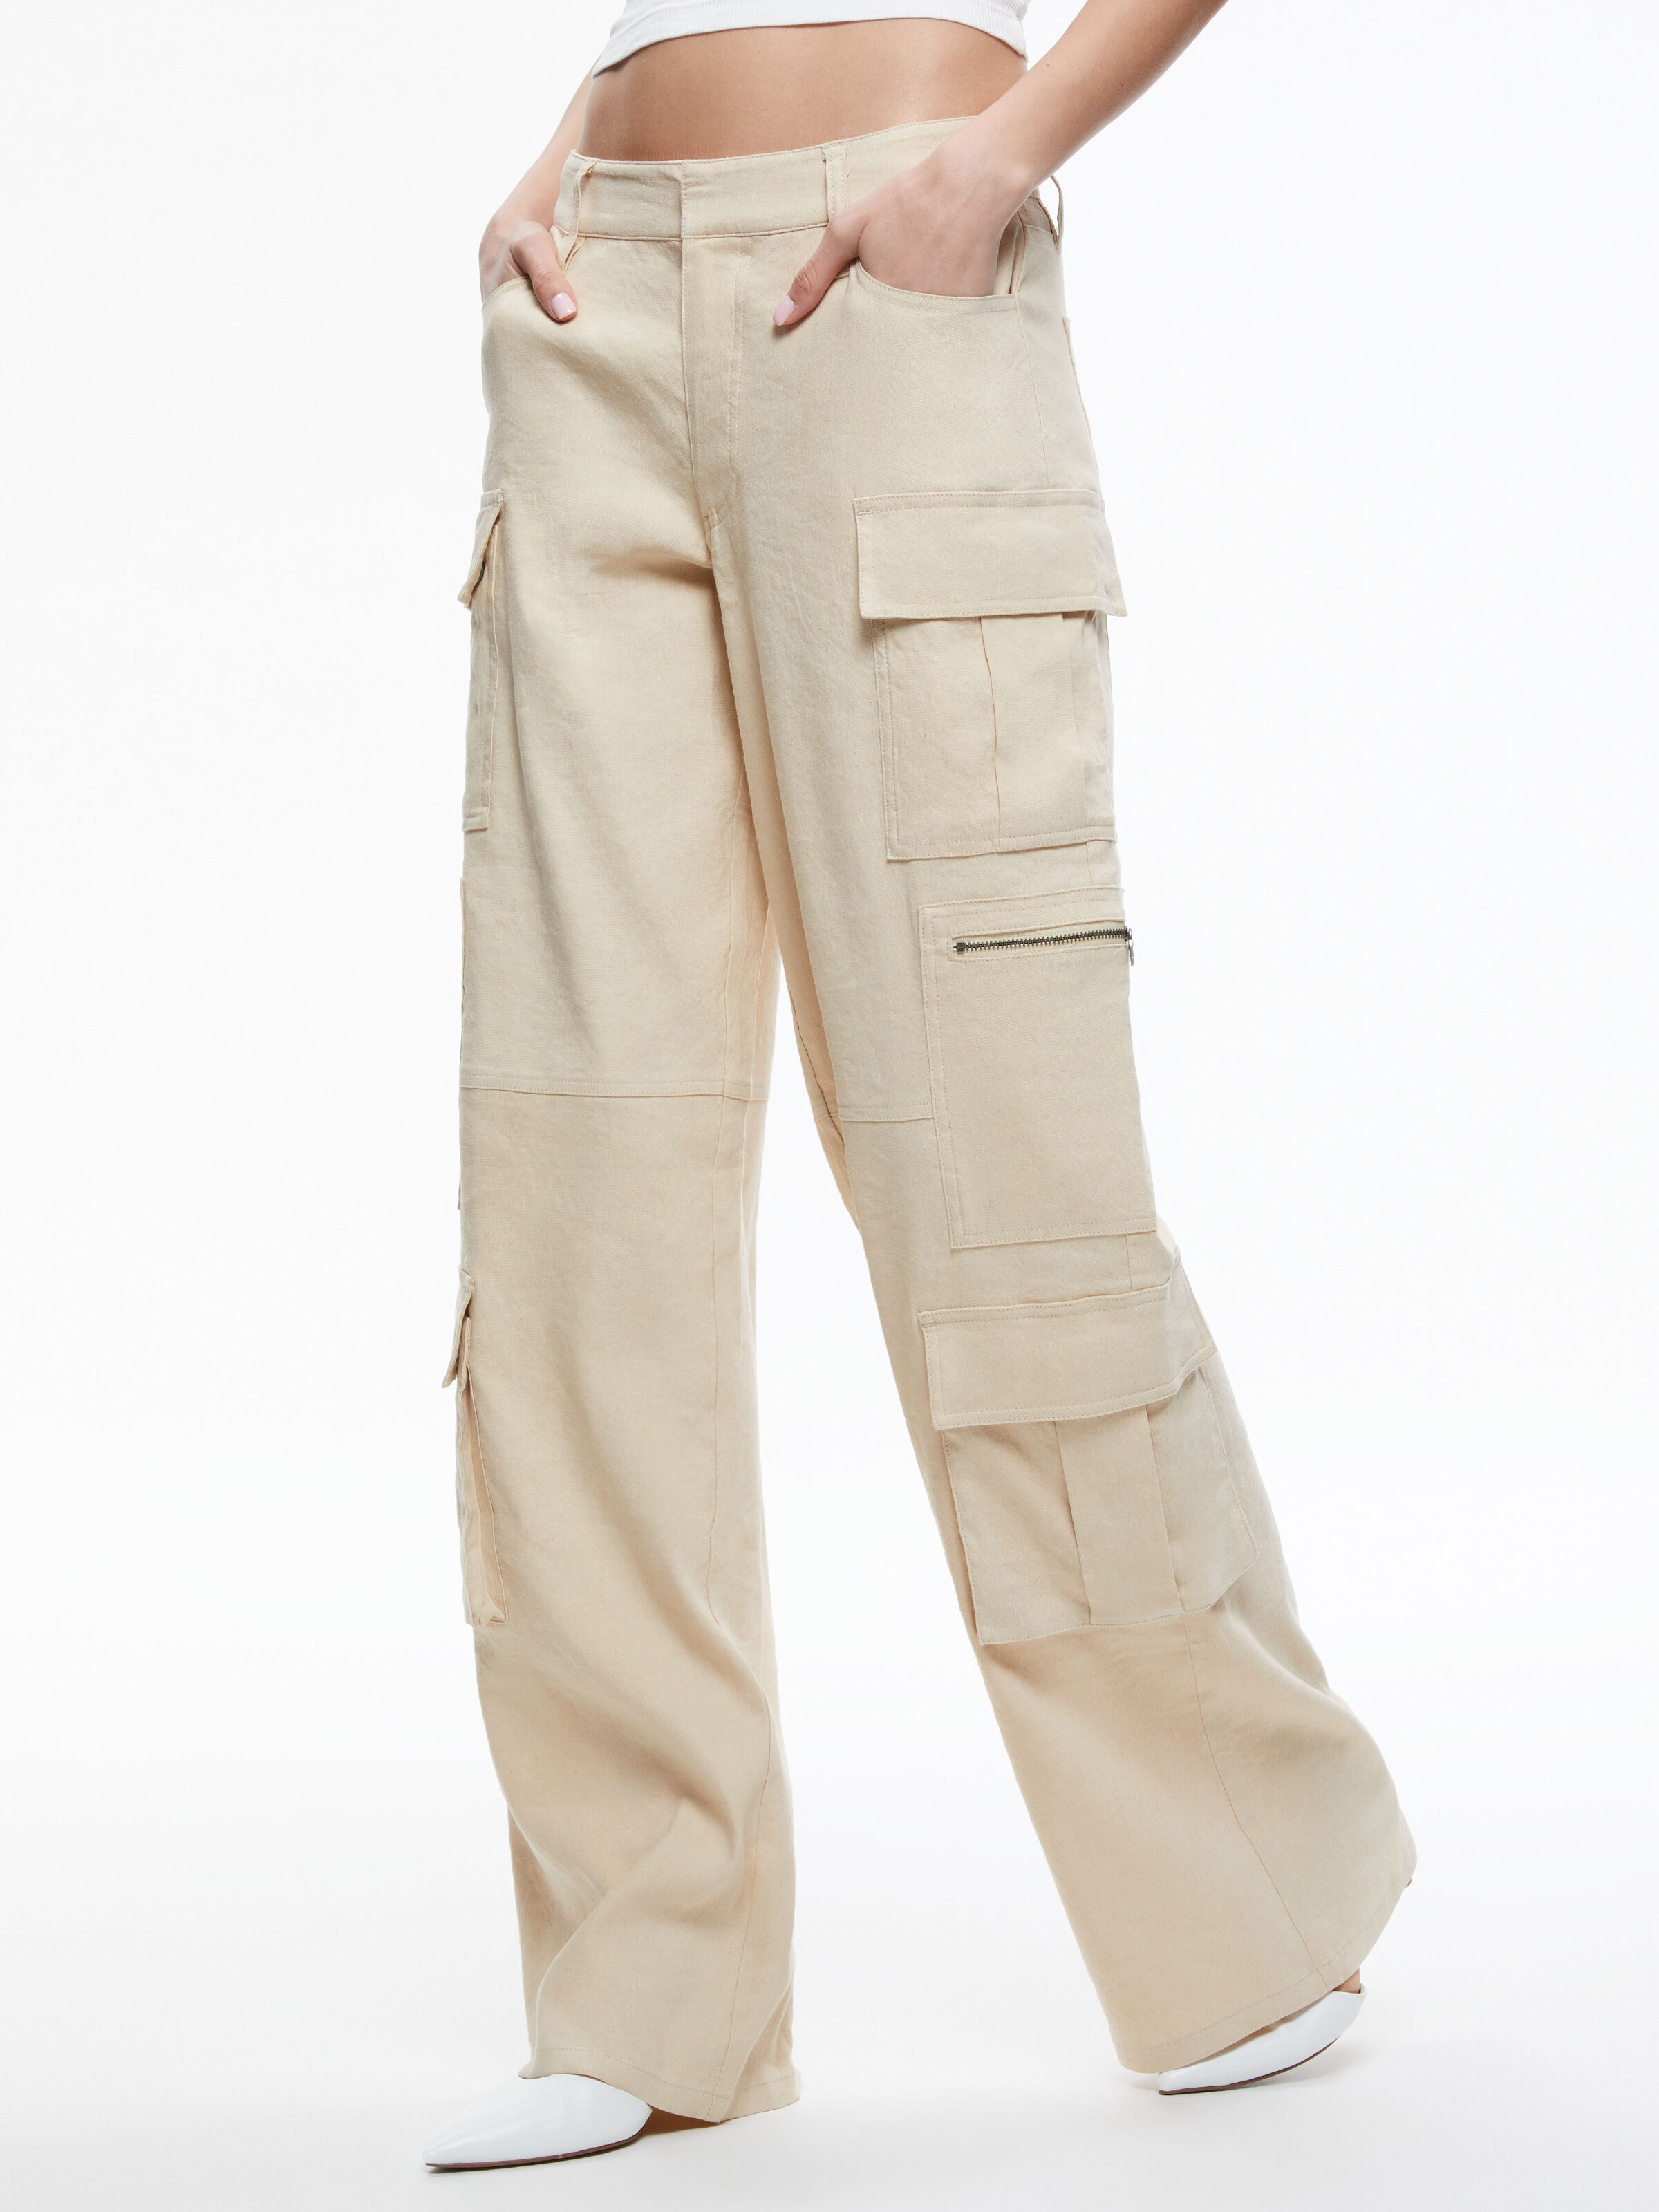 BOTTLE GREEN LINEN CARGO PANT RELAXED FIT  ROOKIES